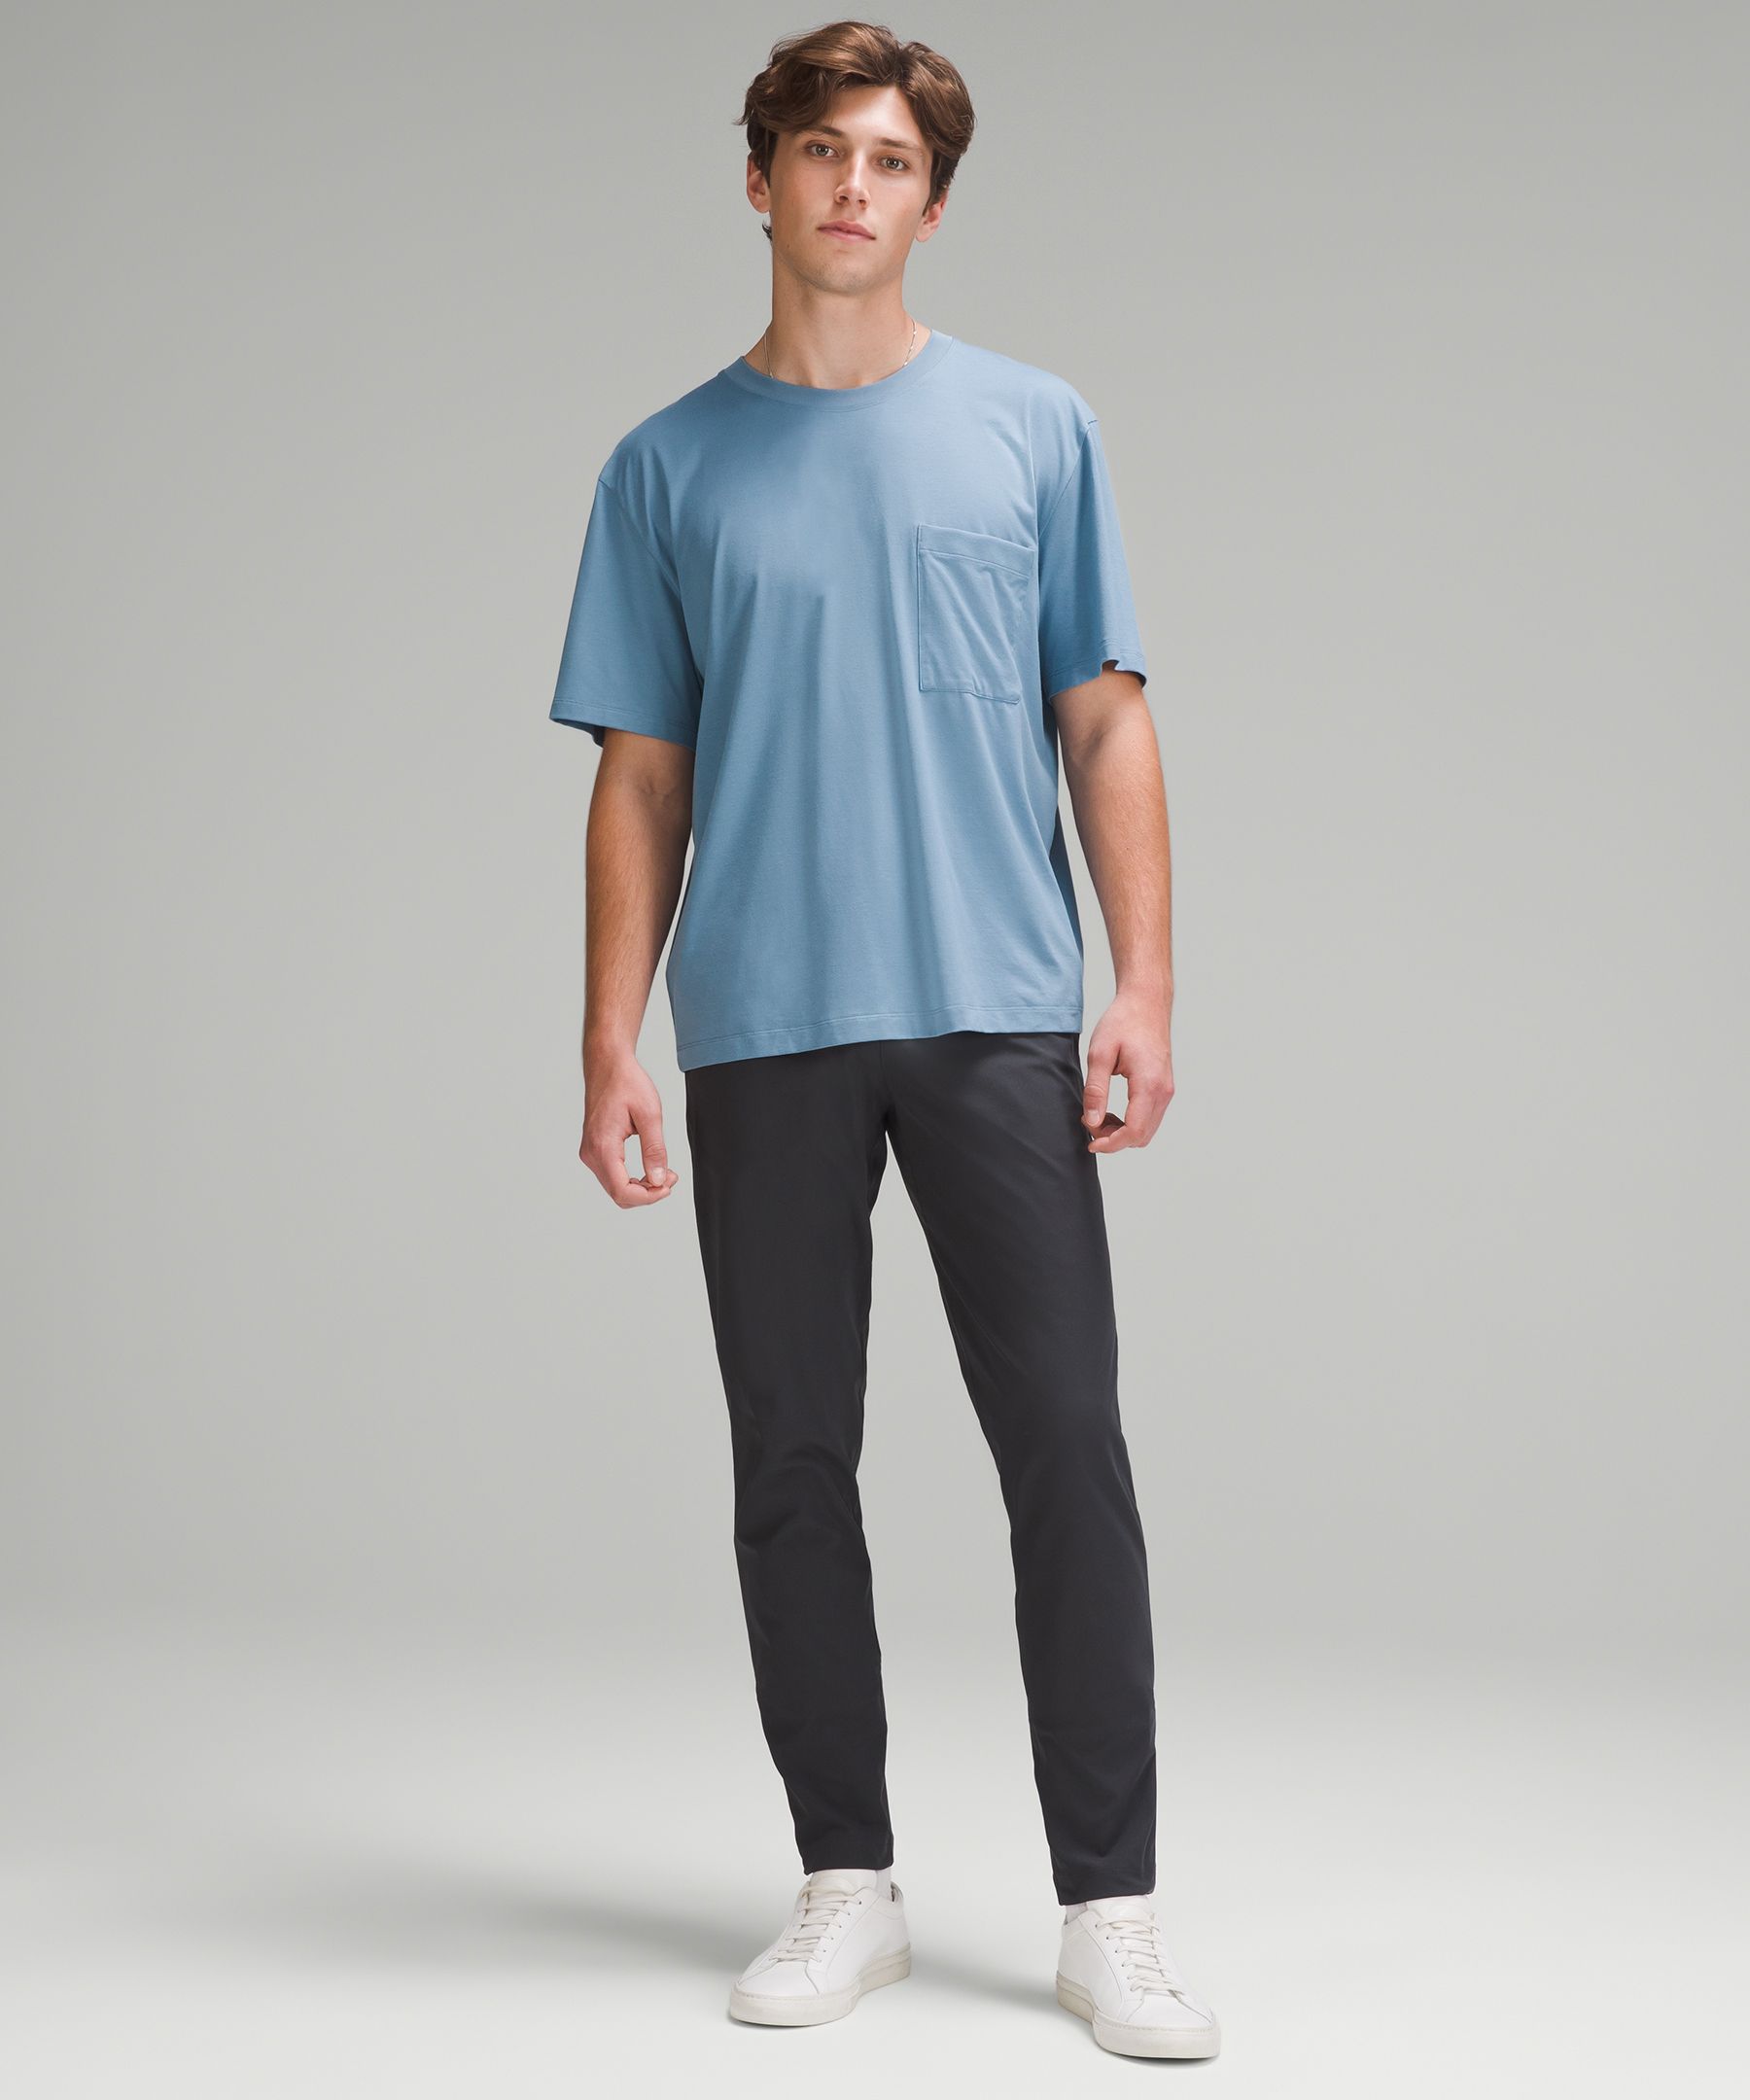 WFH clothes every guy needs 1 - ABC pull-on pants 1b - Sonoma goods f, clothing